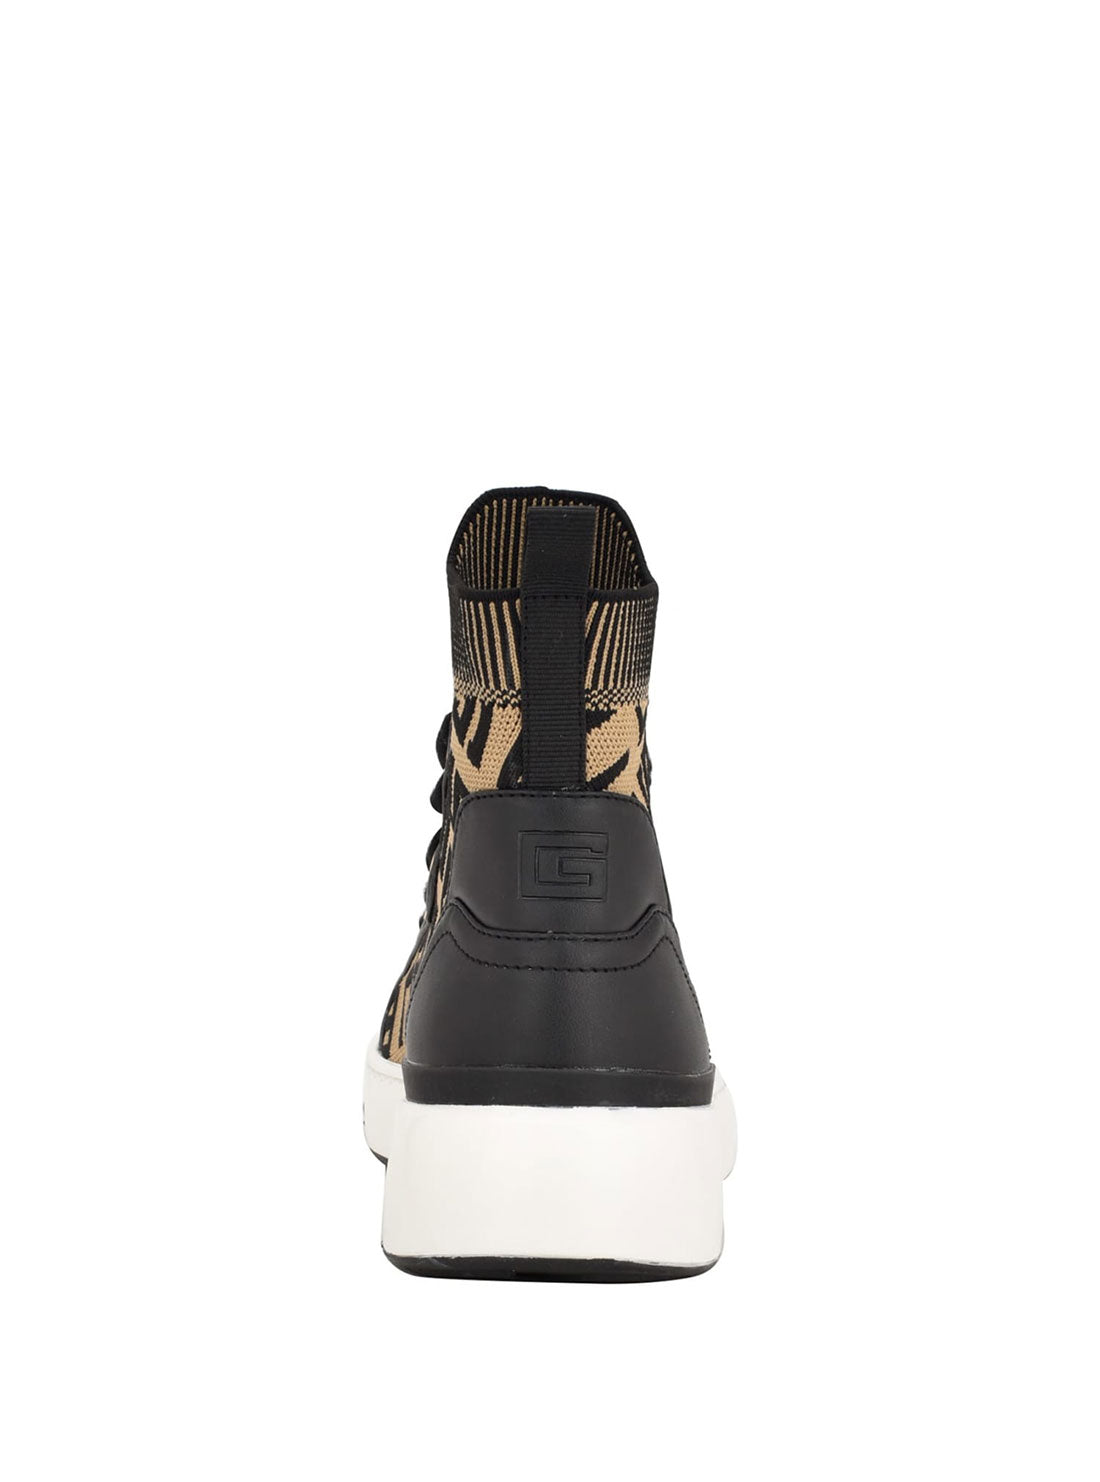 GUESS Black Brown Mannen High Top Sneakers back view